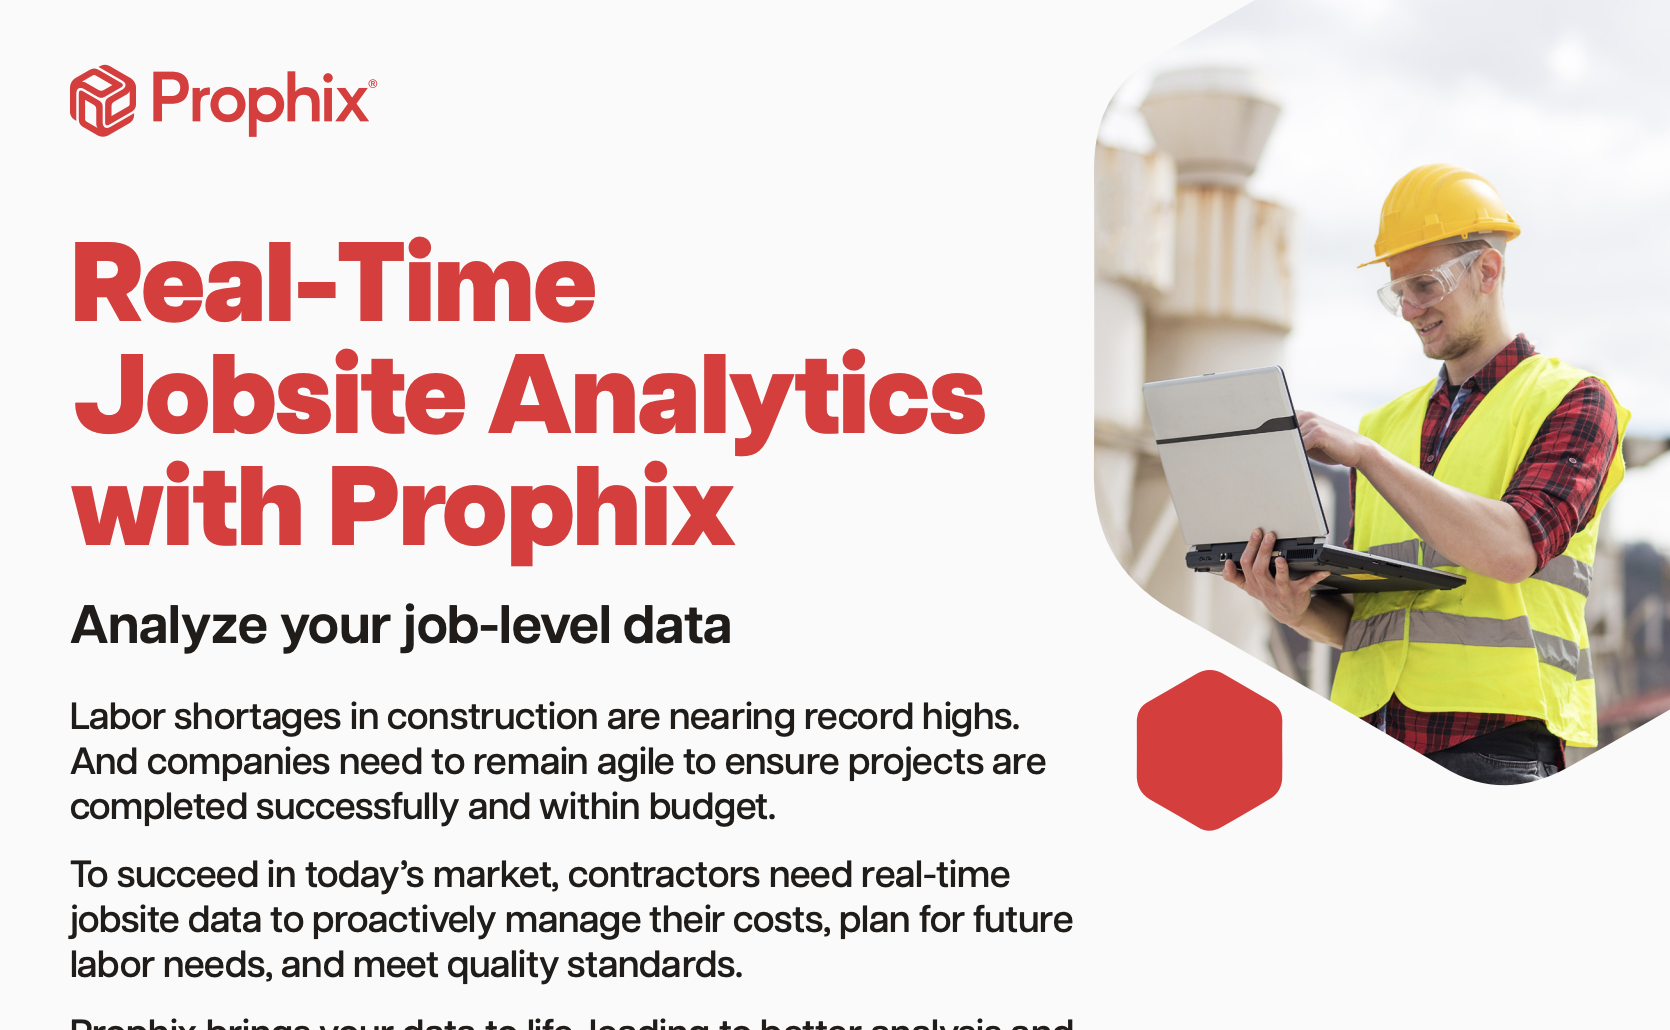 Real-time job site analytics with Propix, providing valuable insights for efficient decision-making.